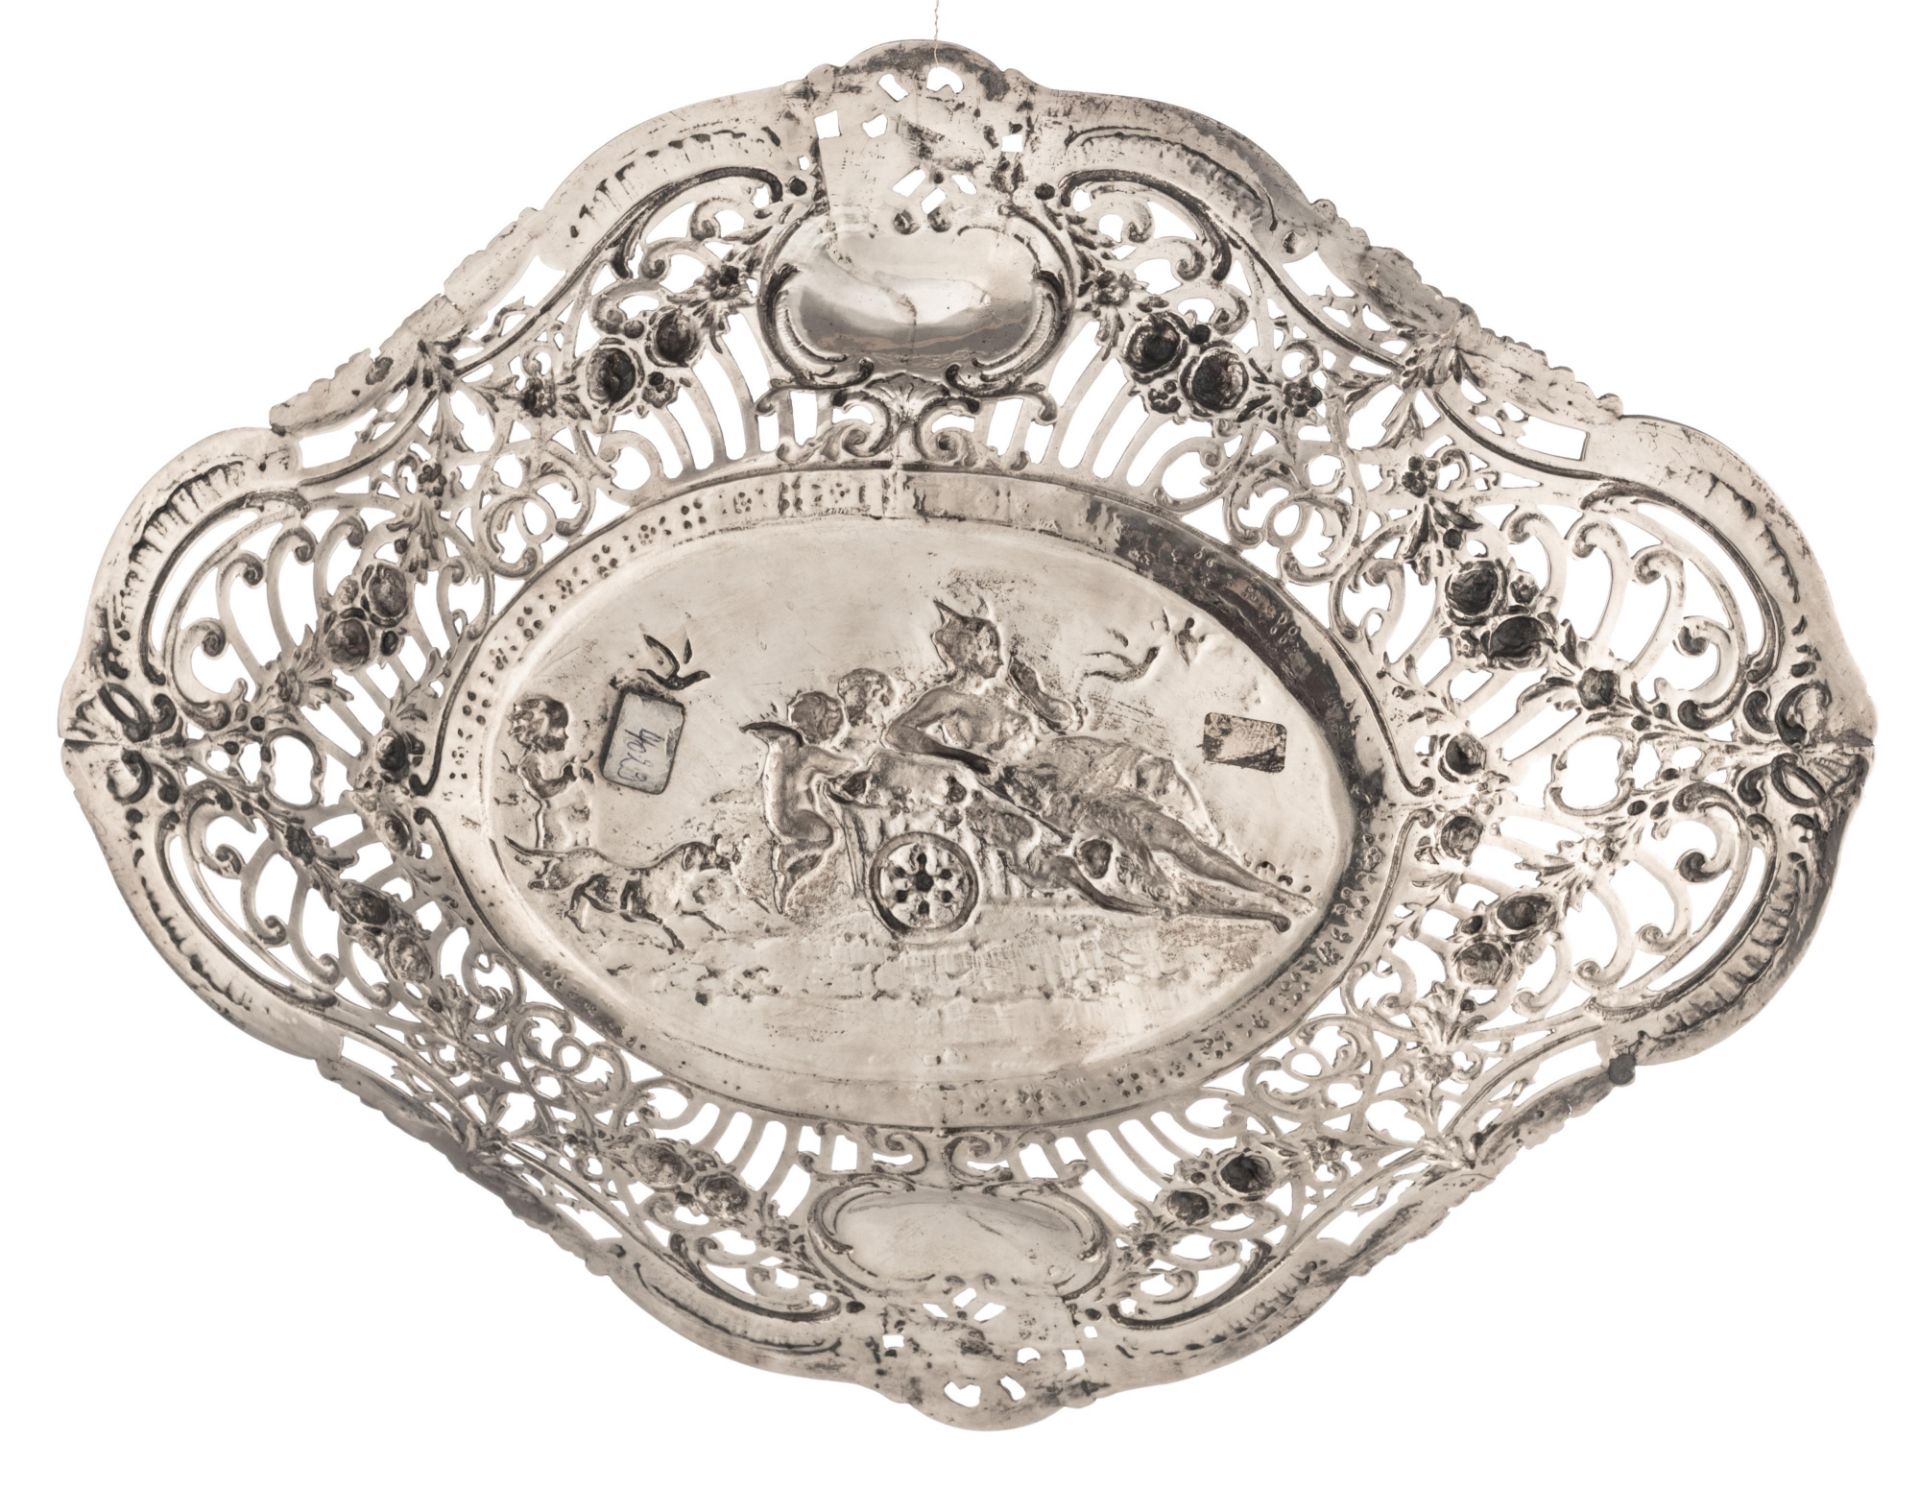 A collection of three silver chargers with ornate repousse pierced work, the well depicting playing - Bild 7 aus 12